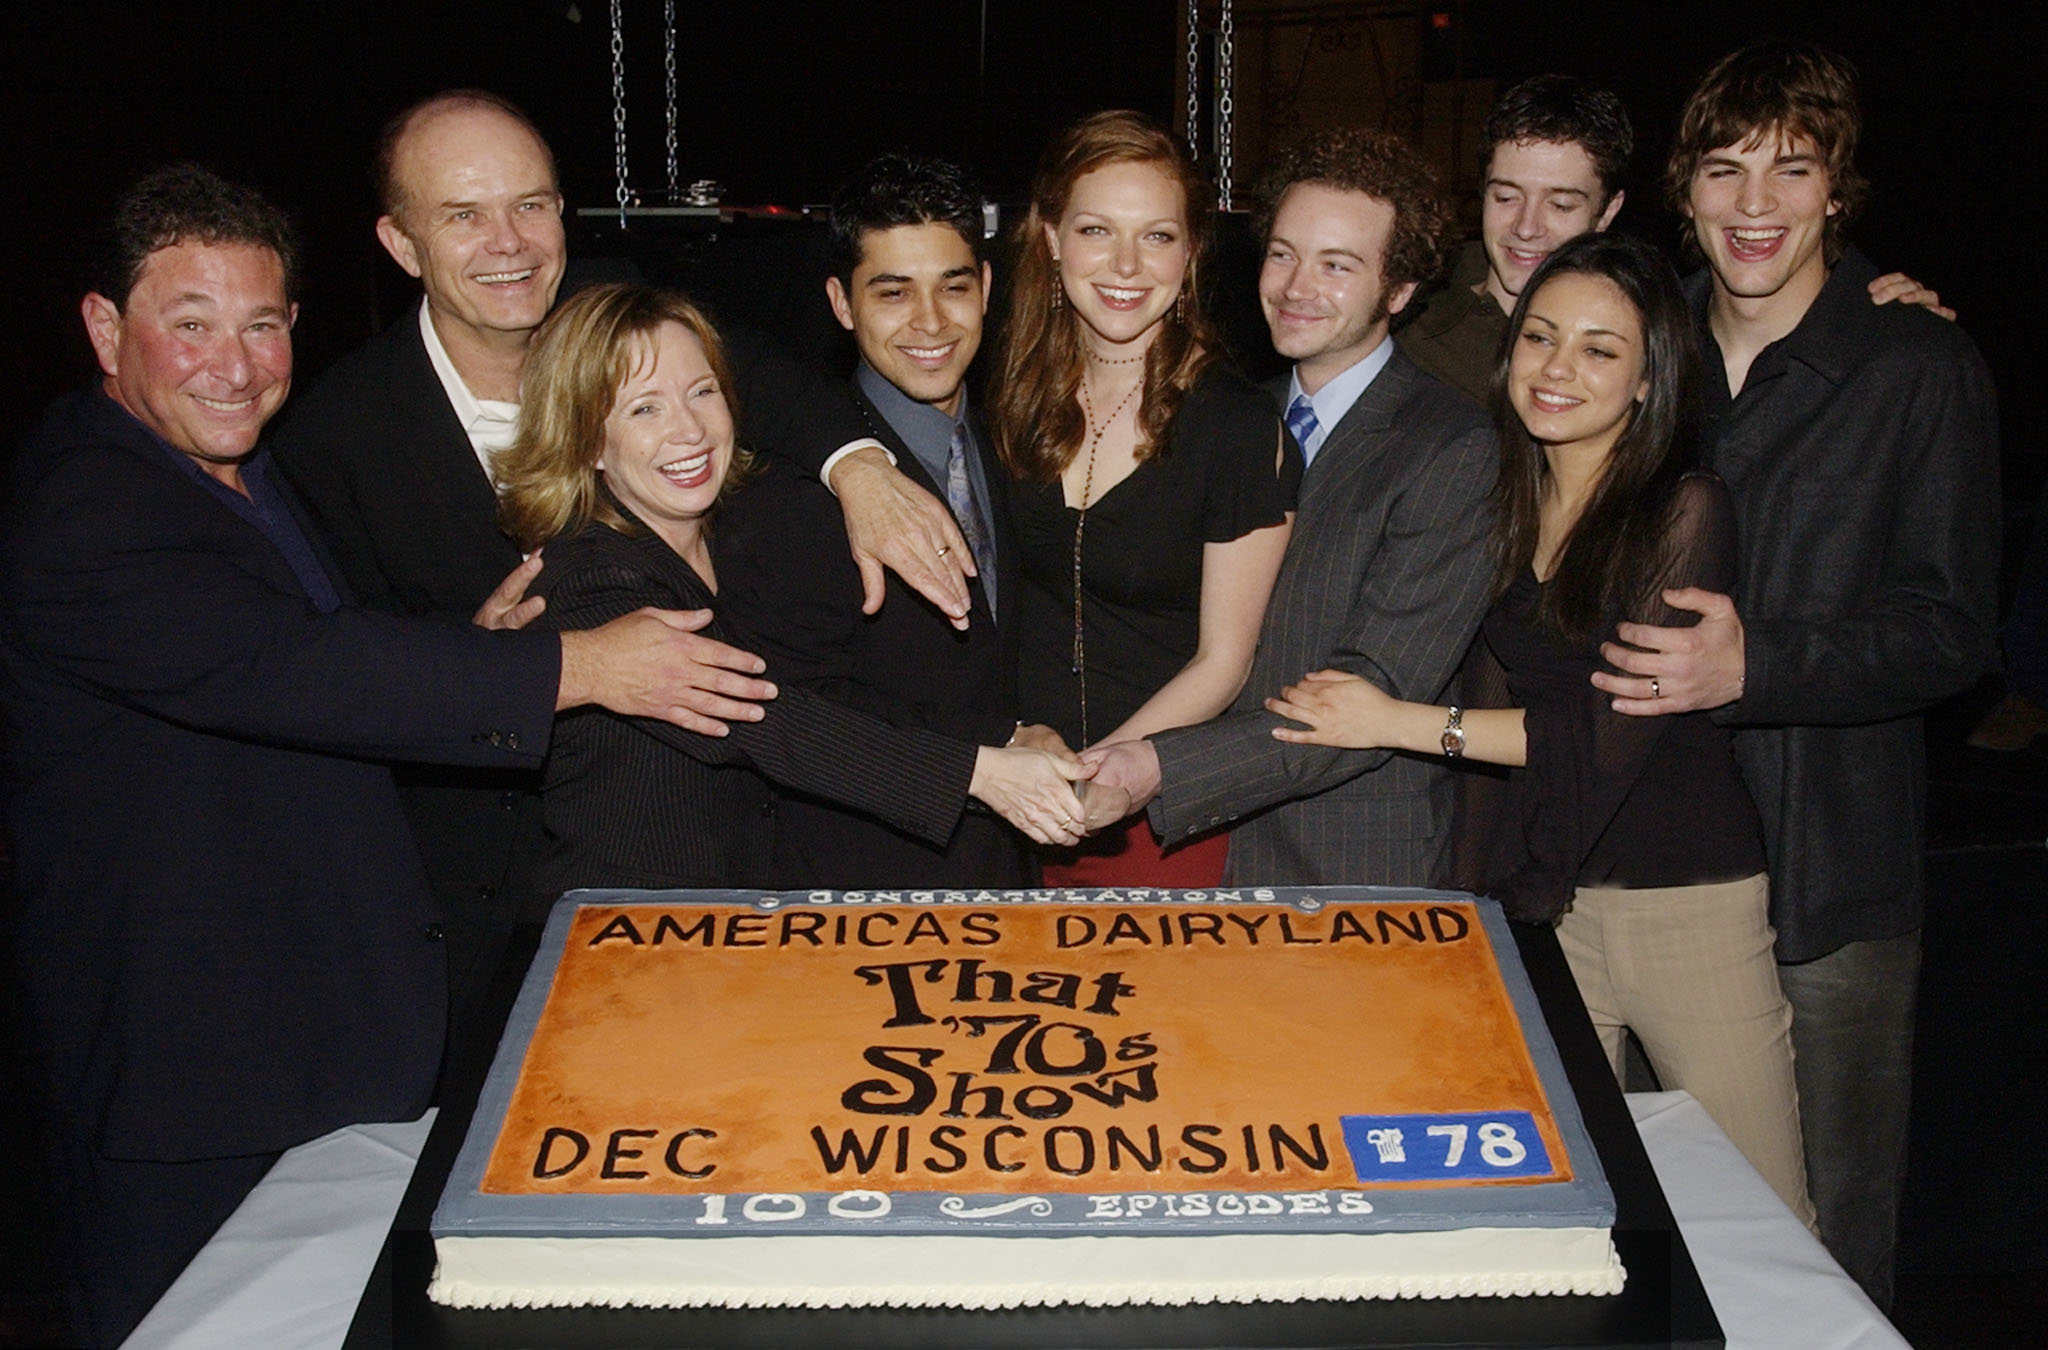 The cast of the 70s show around a cae